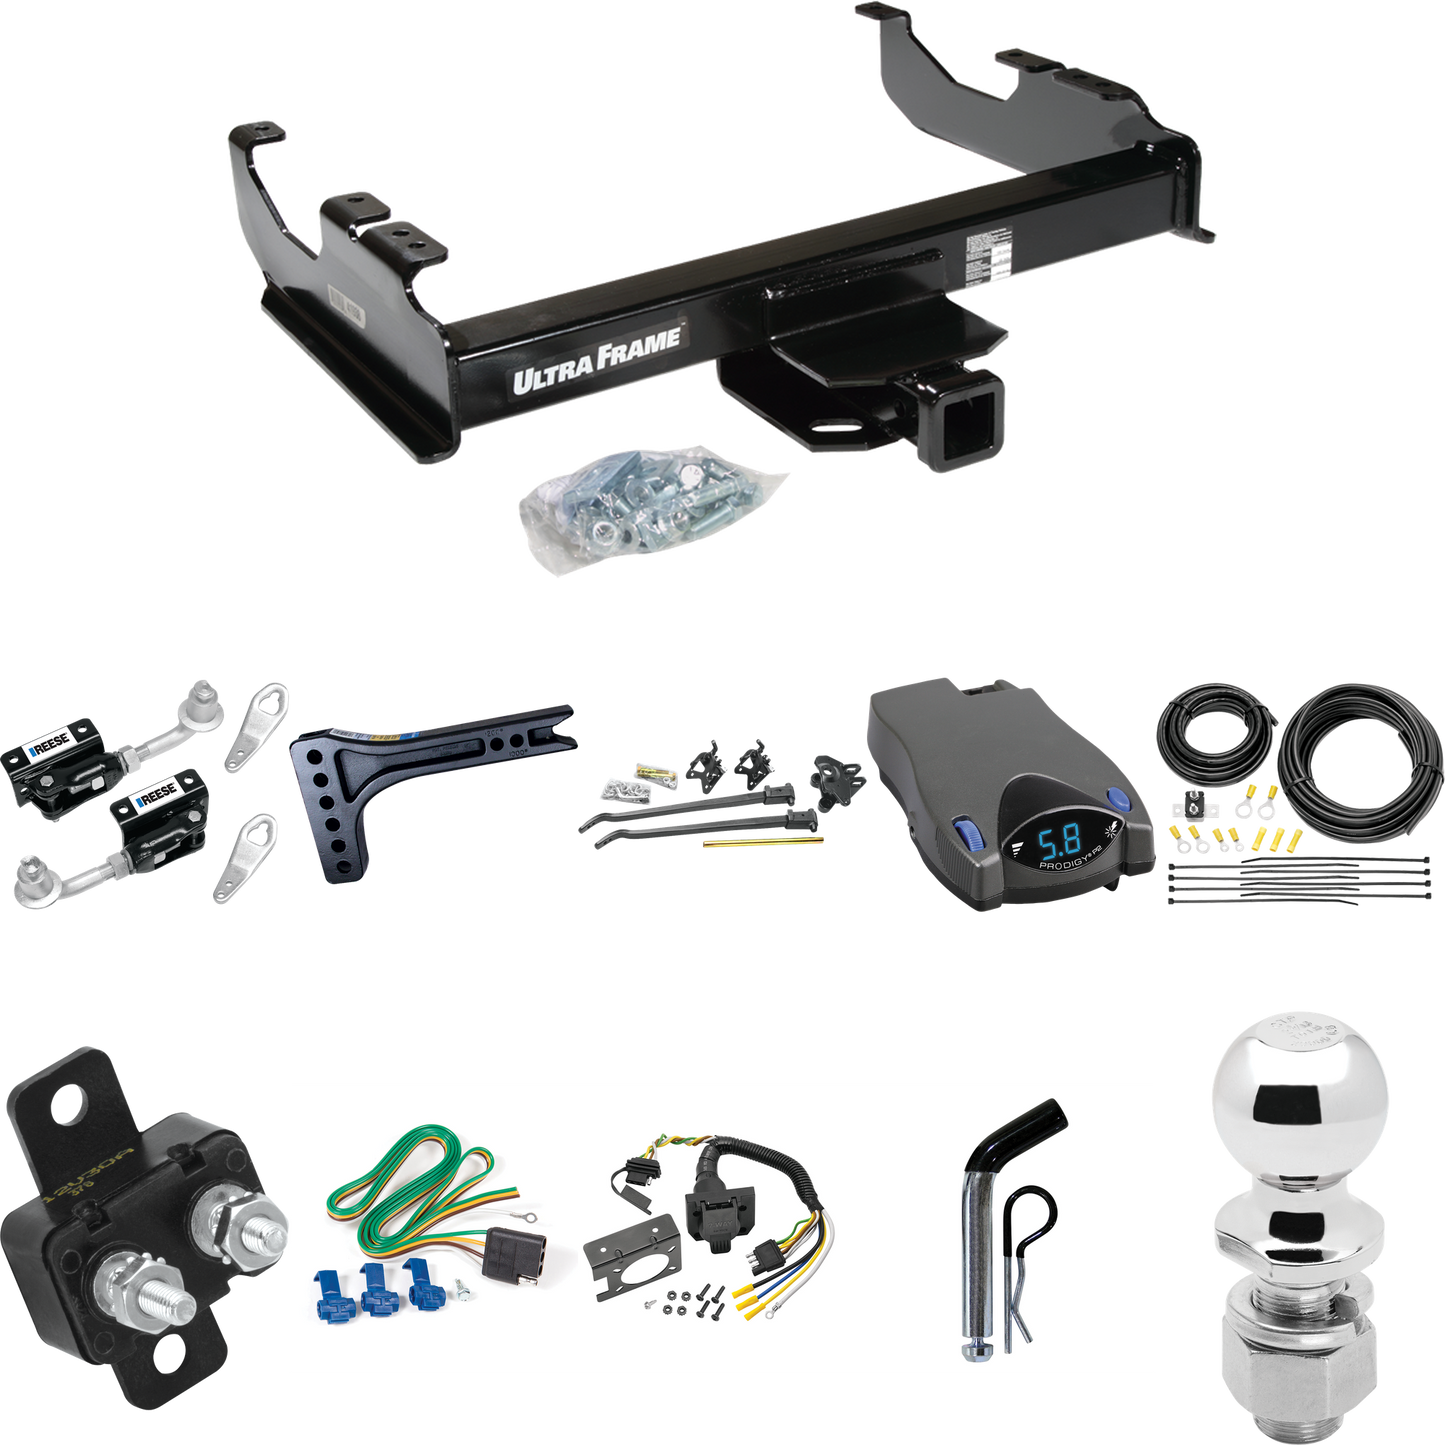 Fits 1963-1965 GMC 1000 Series Trailer Hitch Tow PKG w/ 15K Trunnion Bar Weight Distribution Hitch + Pin/Clip + Dual Cam Sway Control + 2-5/16" Ball + Tekonsha Prodigy P2 Brake Control + 7-Way RV Wiring By Draw-Tite